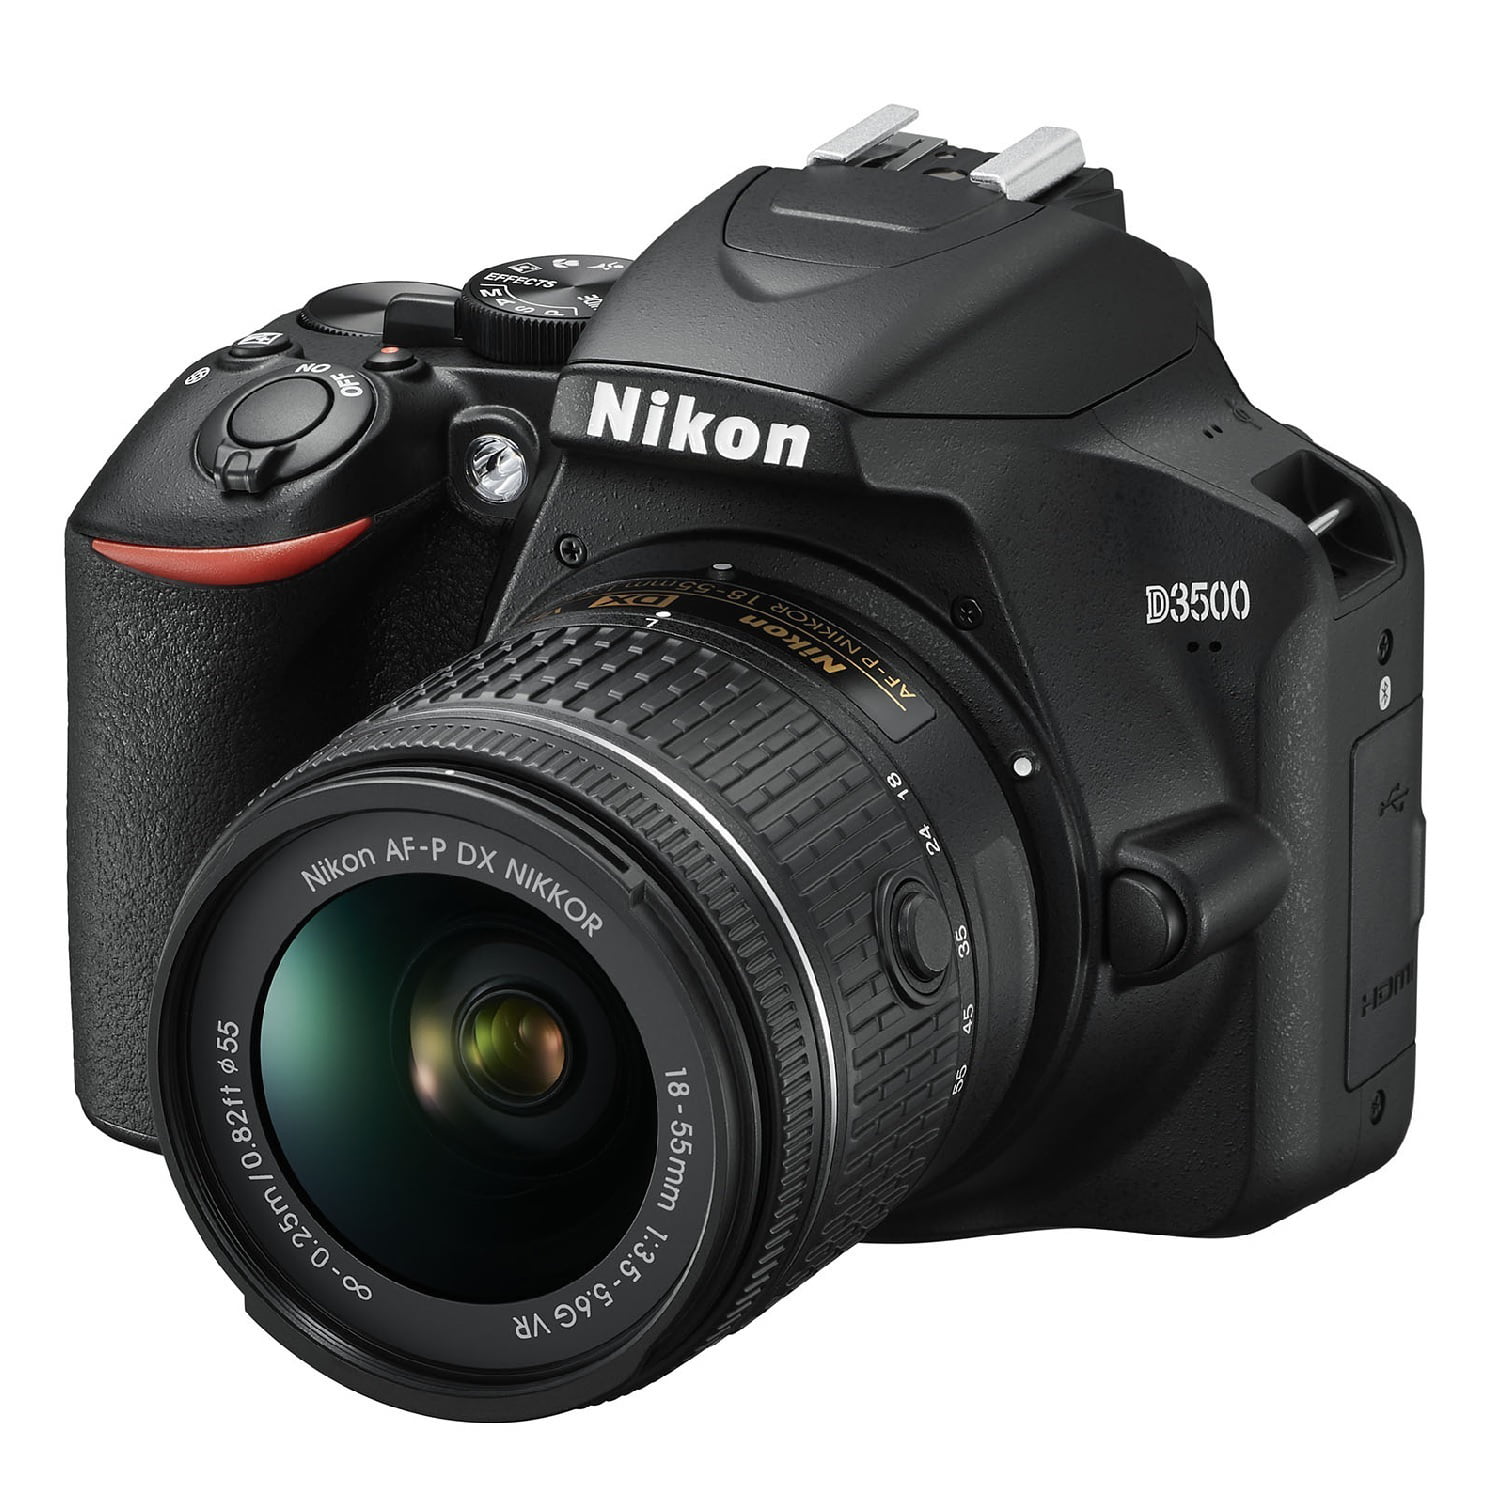 Grab speed hemisphere Nikon D3500 DSLR Camera with 18-55mm VR and 70-300mm Lenses with Case and  Bundle - Walmart.com